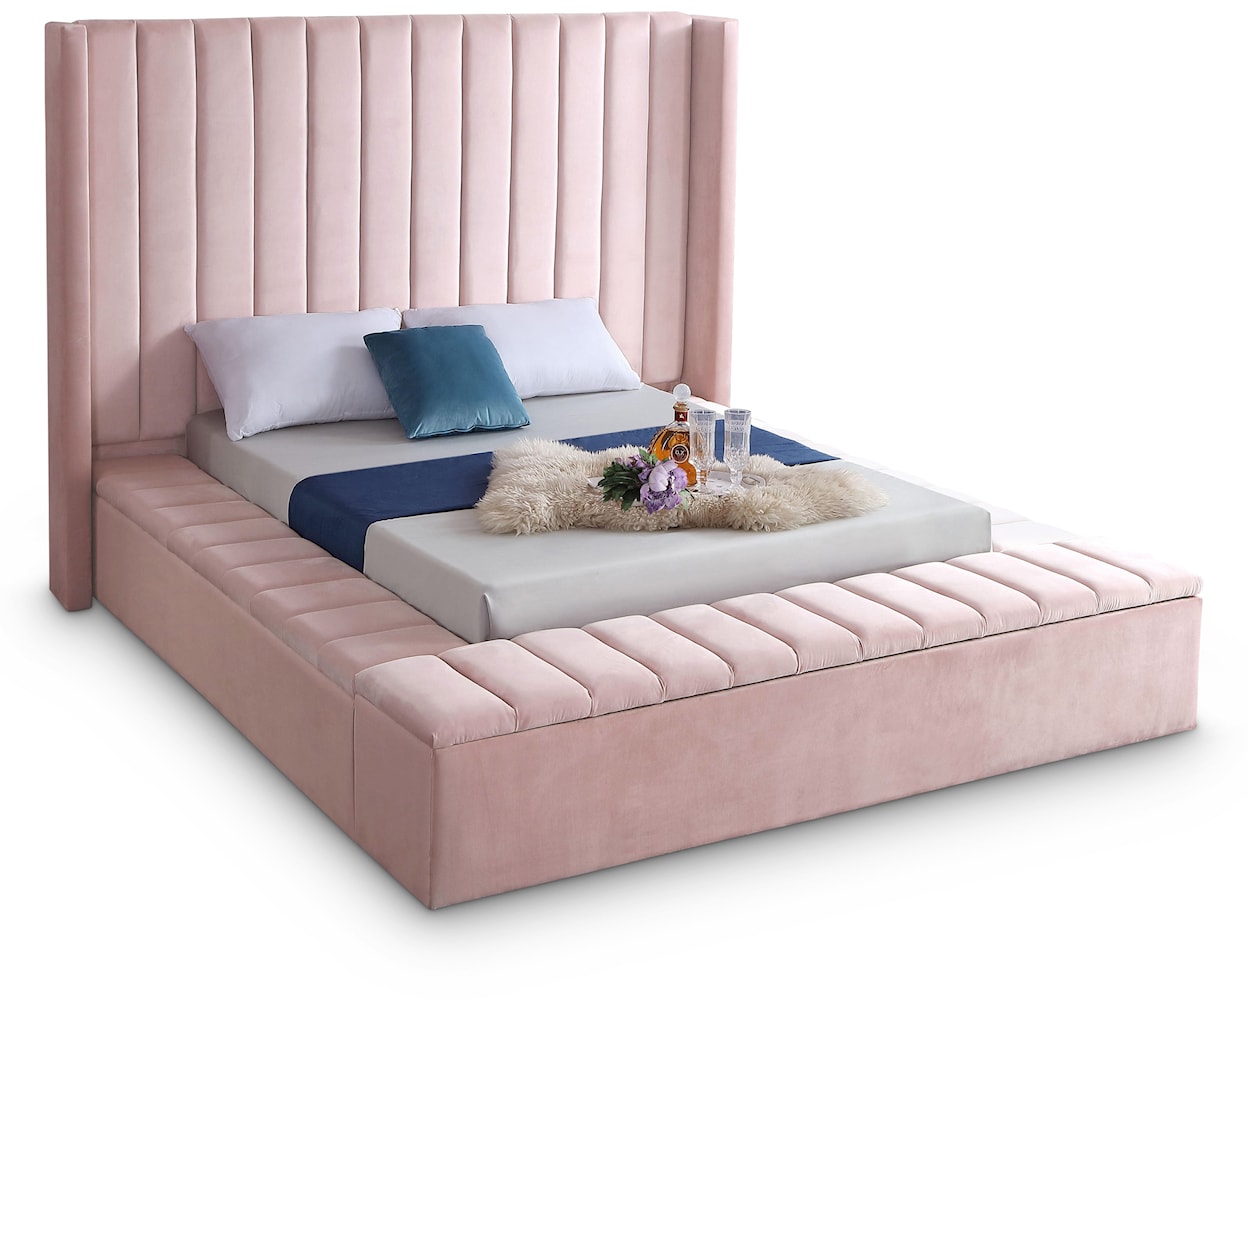 Meridian Furniture Kiki Queen Bed (3 Boxes)